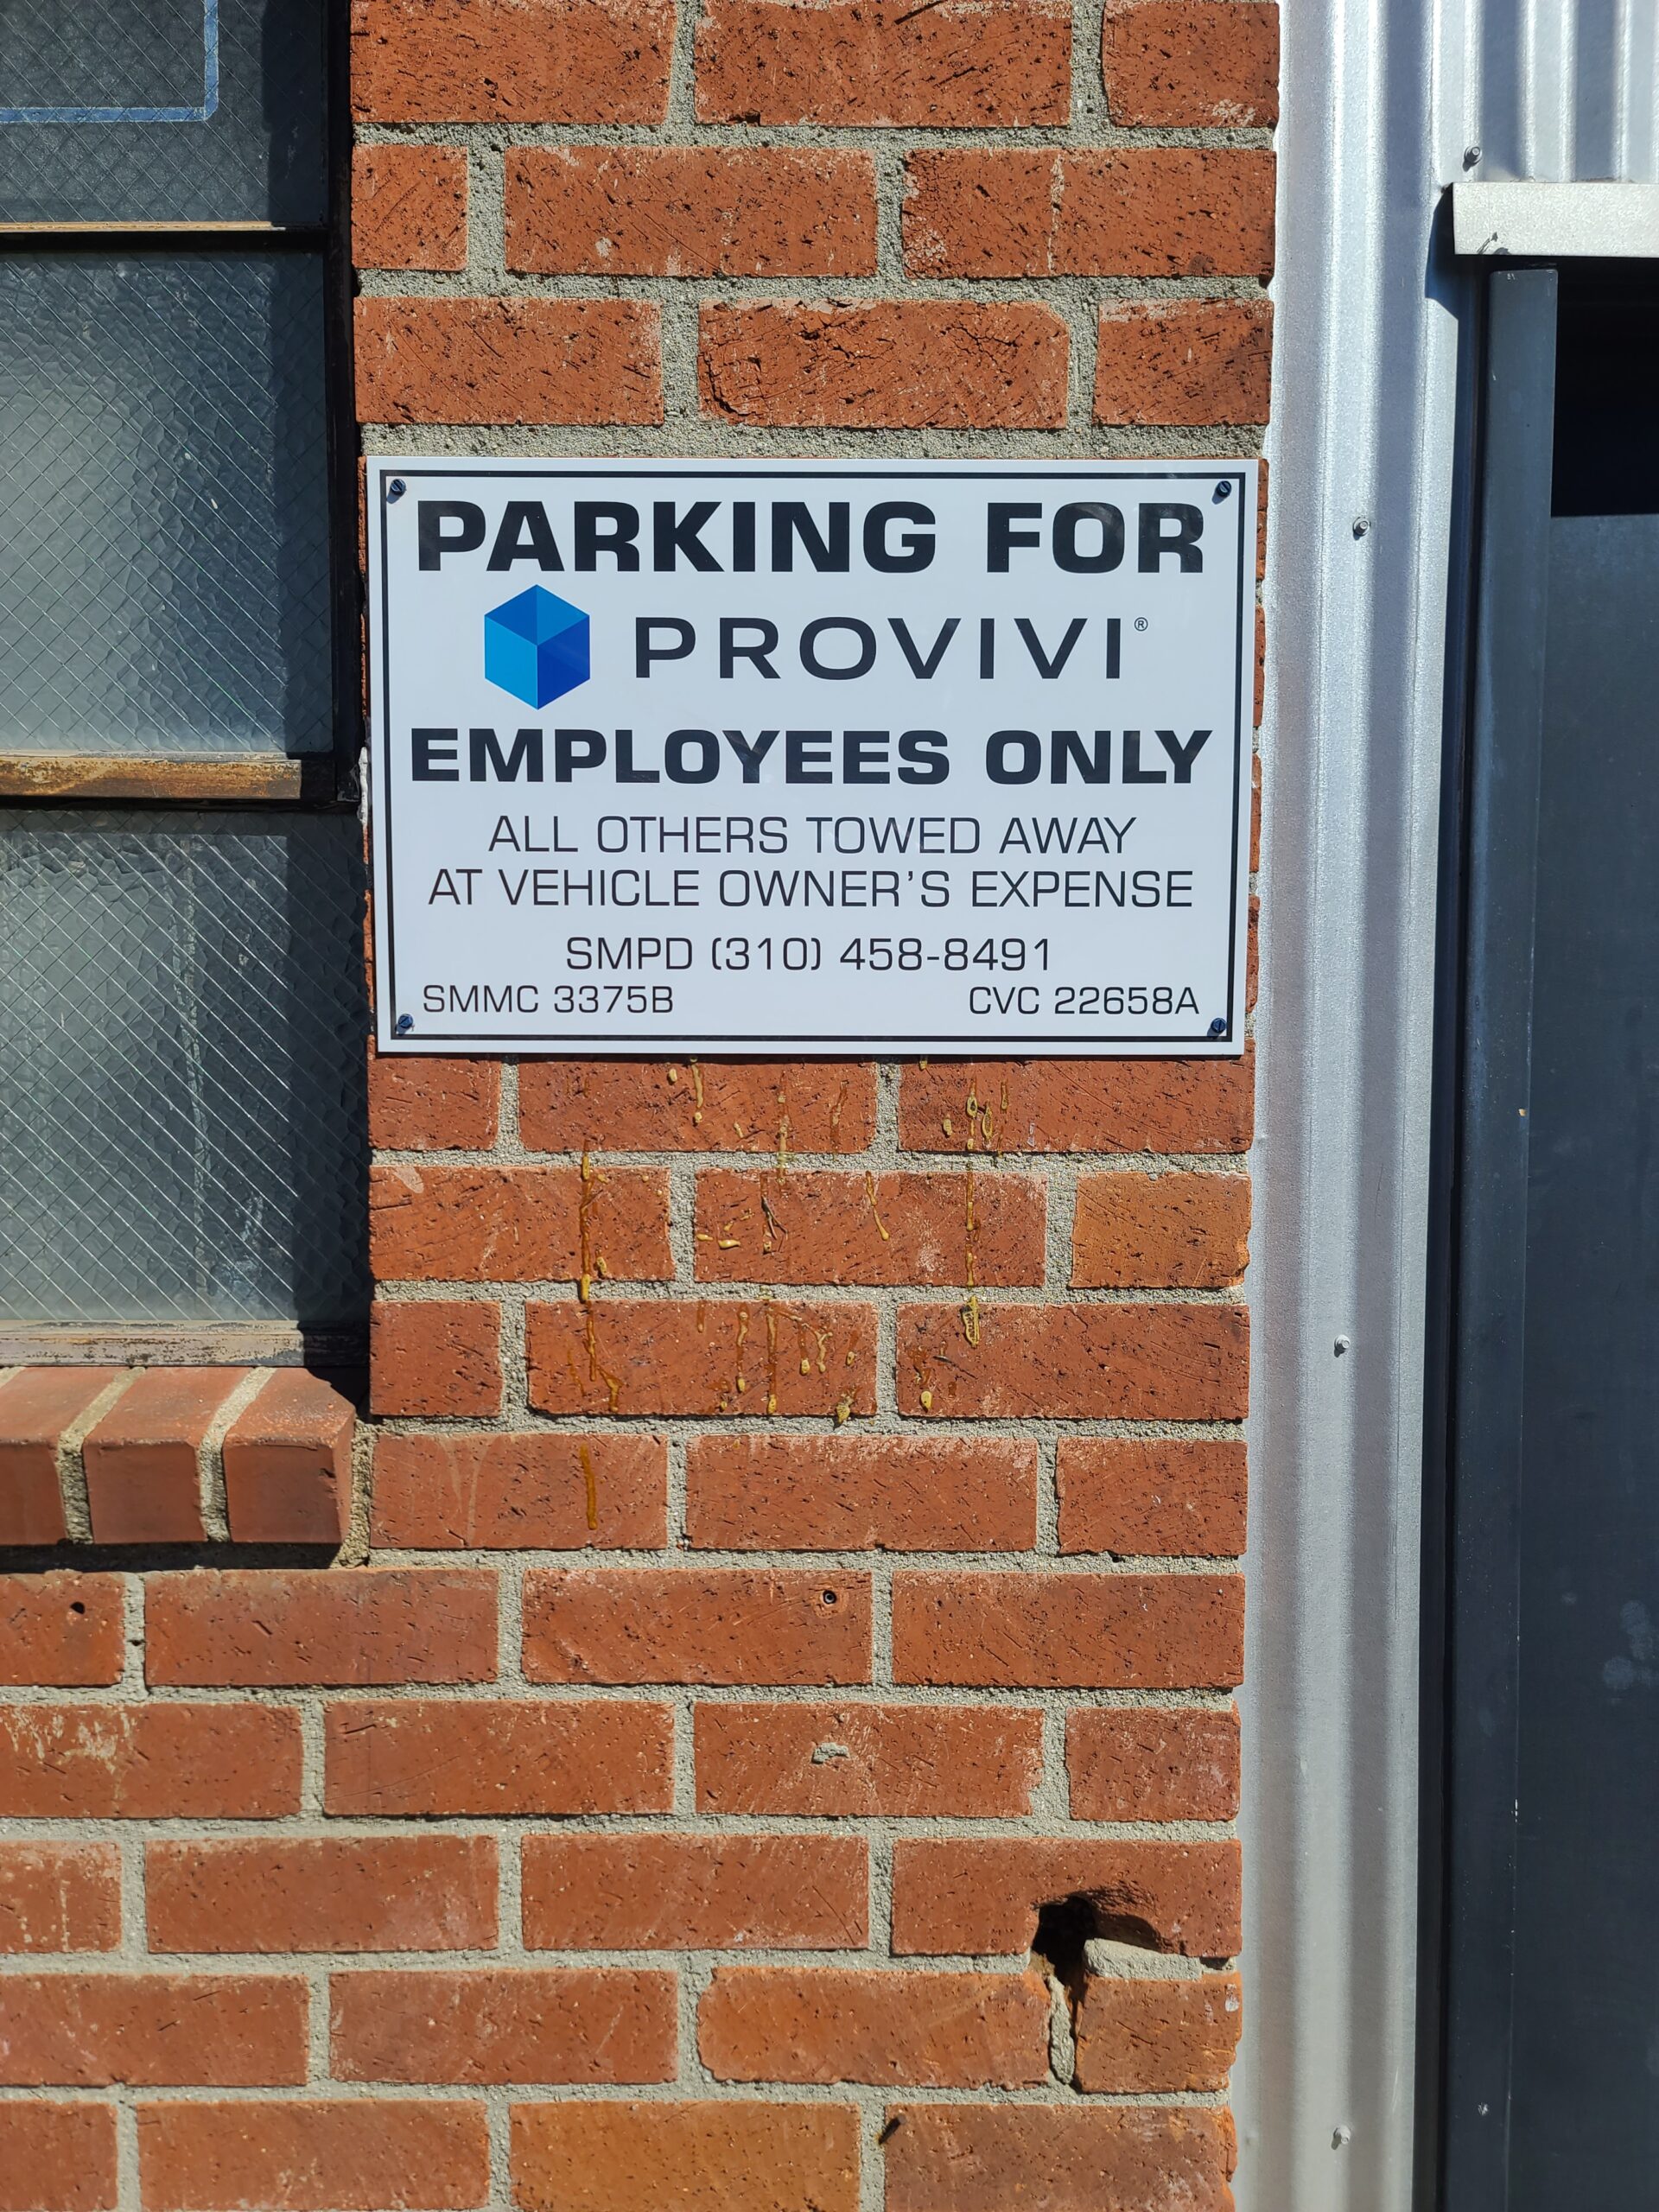 Our aluminum parking lot sign for Provivi's Santa Monica location makes the parking process much more convenient for employees.